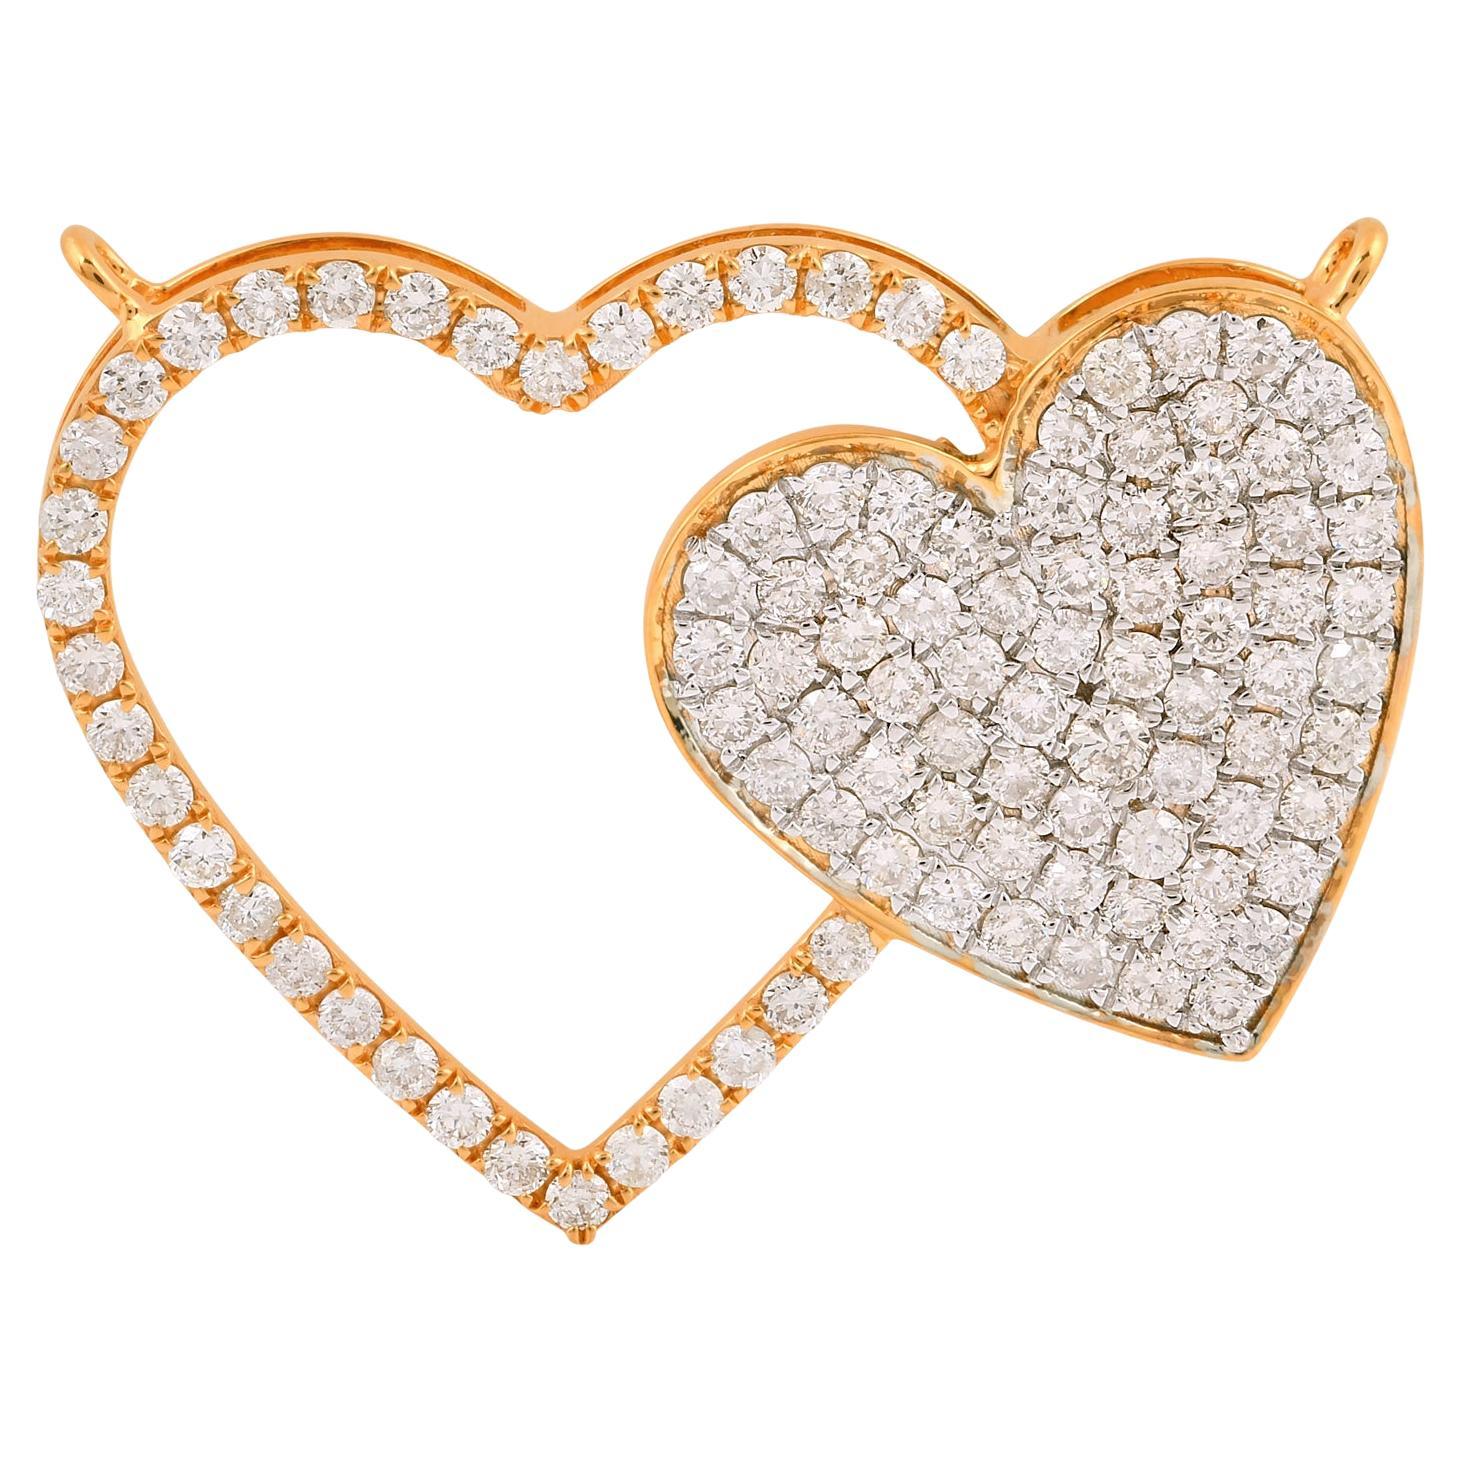 1.50 Carat Diamond Pave Double Heart Charm Pendant Solid 18k Yellow Gold Jewelry